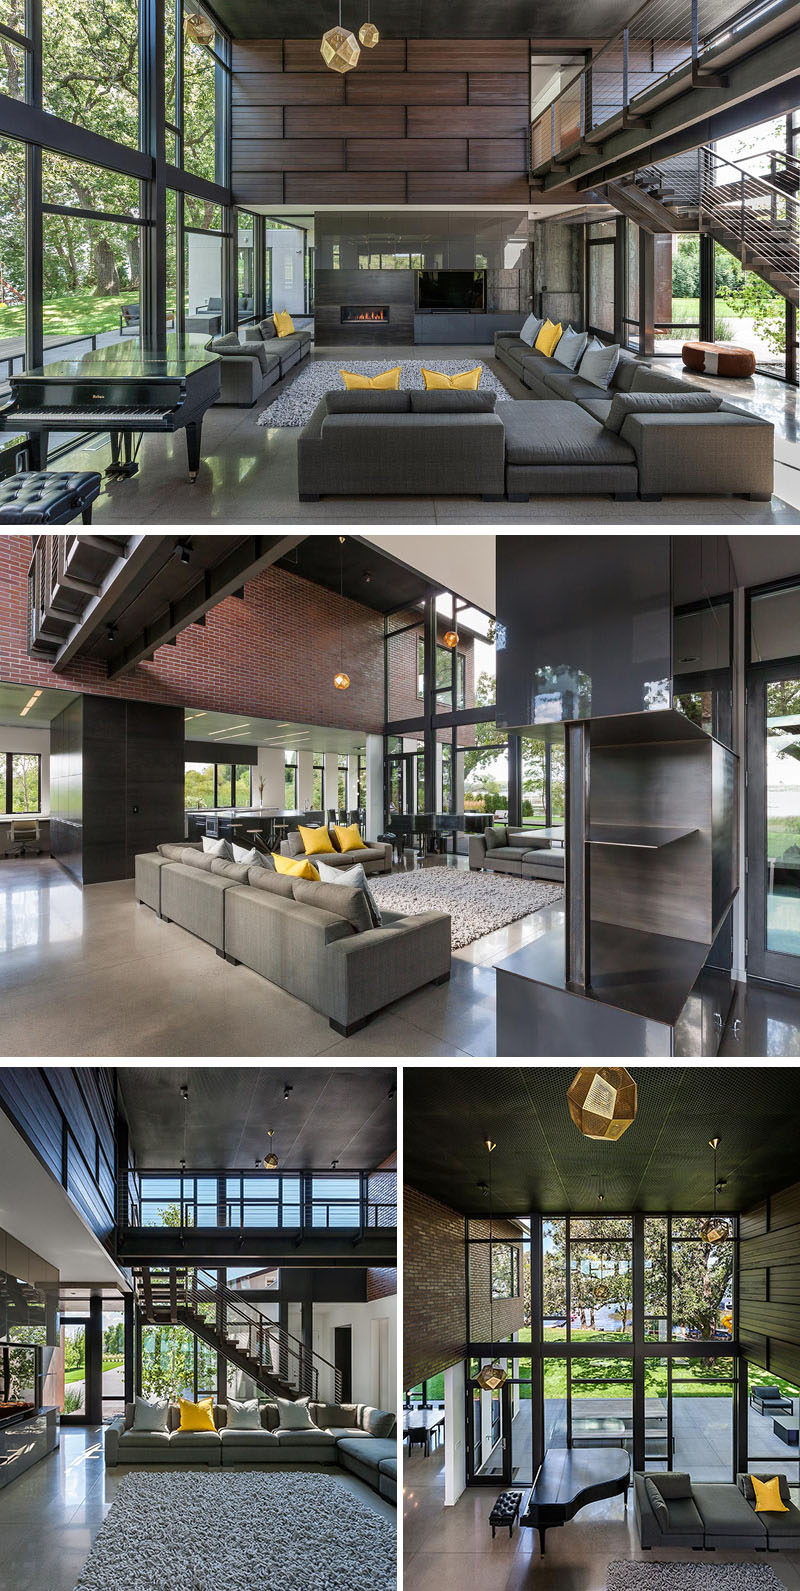 Inside this modern industrial house, the living room has a two story atrium with glass walls on the north and south edges capturing daylight throughout the day and inviting views through the house to the trees and lake beyond. #ModernIndustrial #LivingRoom